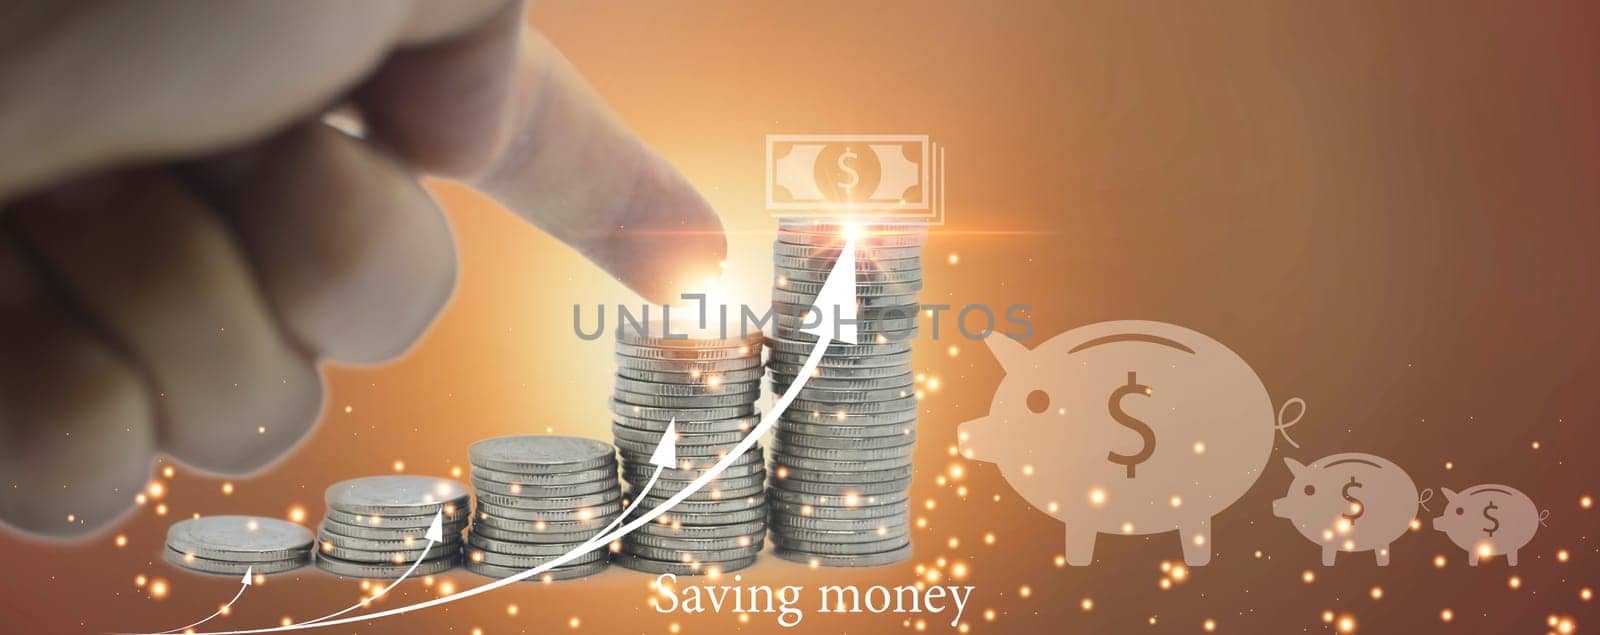 money saving concept for the future, financial planning by boonruen